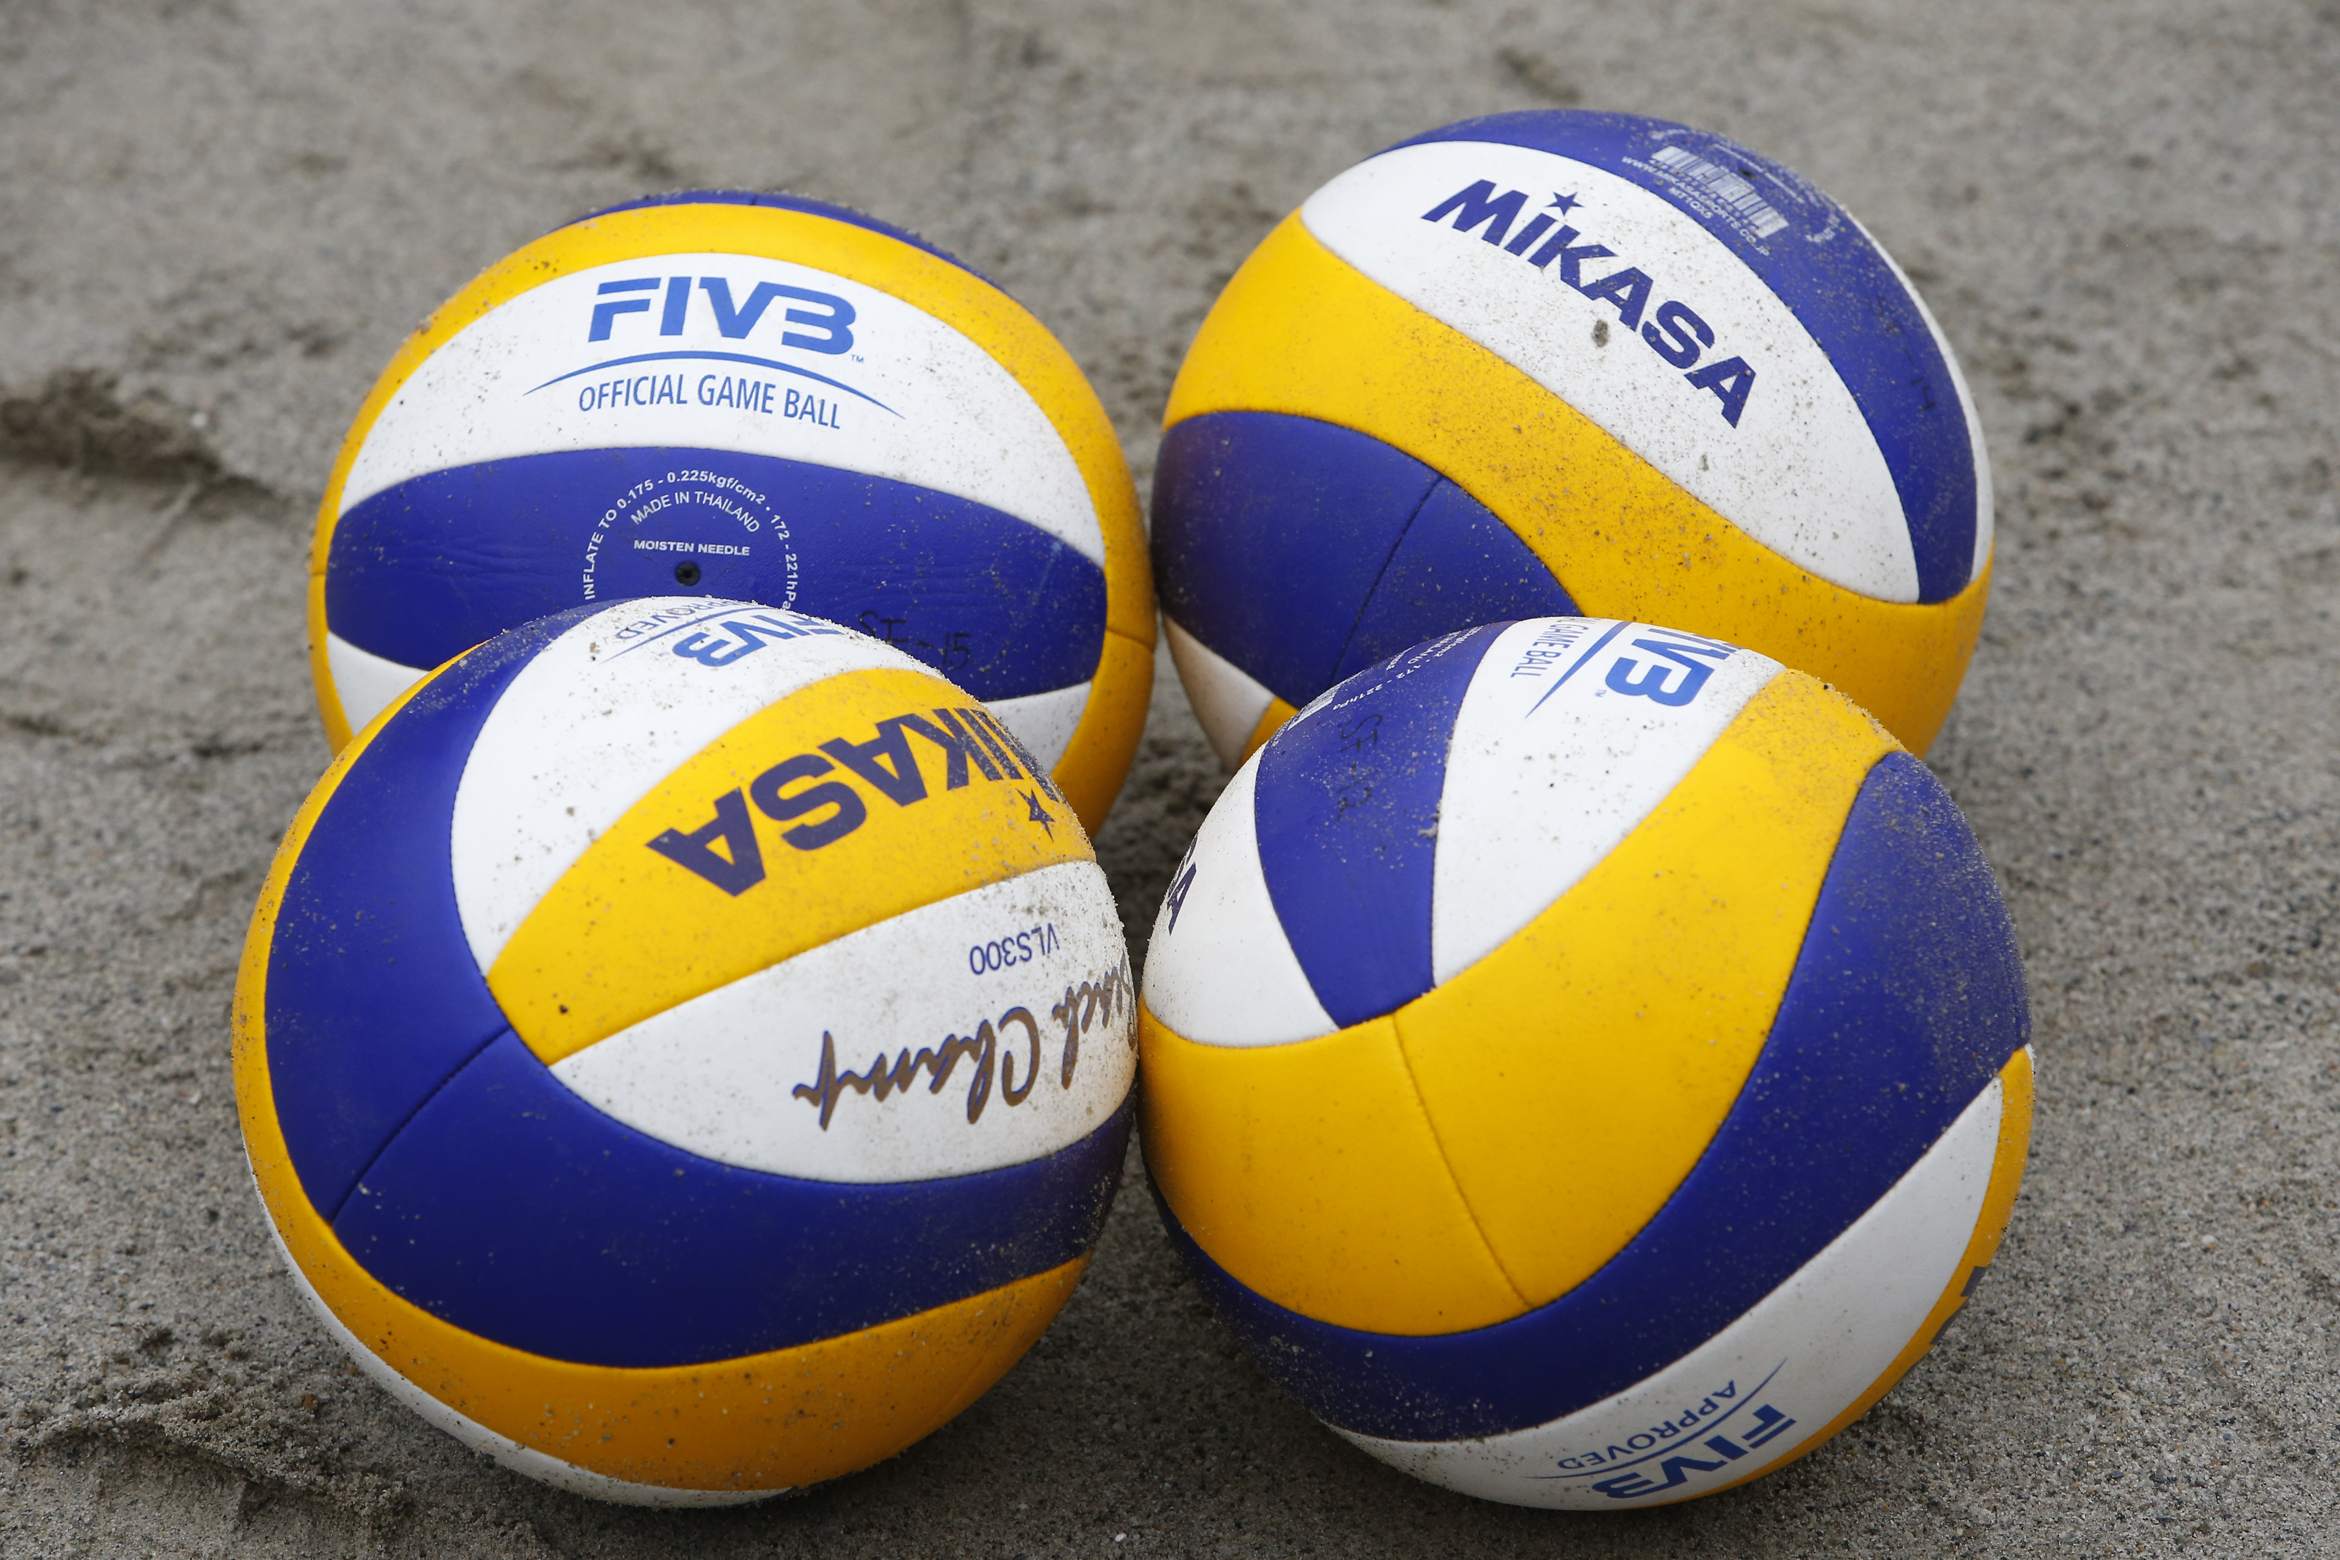 Mikasa V200W Official Tokyo 2021 FIVB Game Ball Professional Olympic Volleyball 